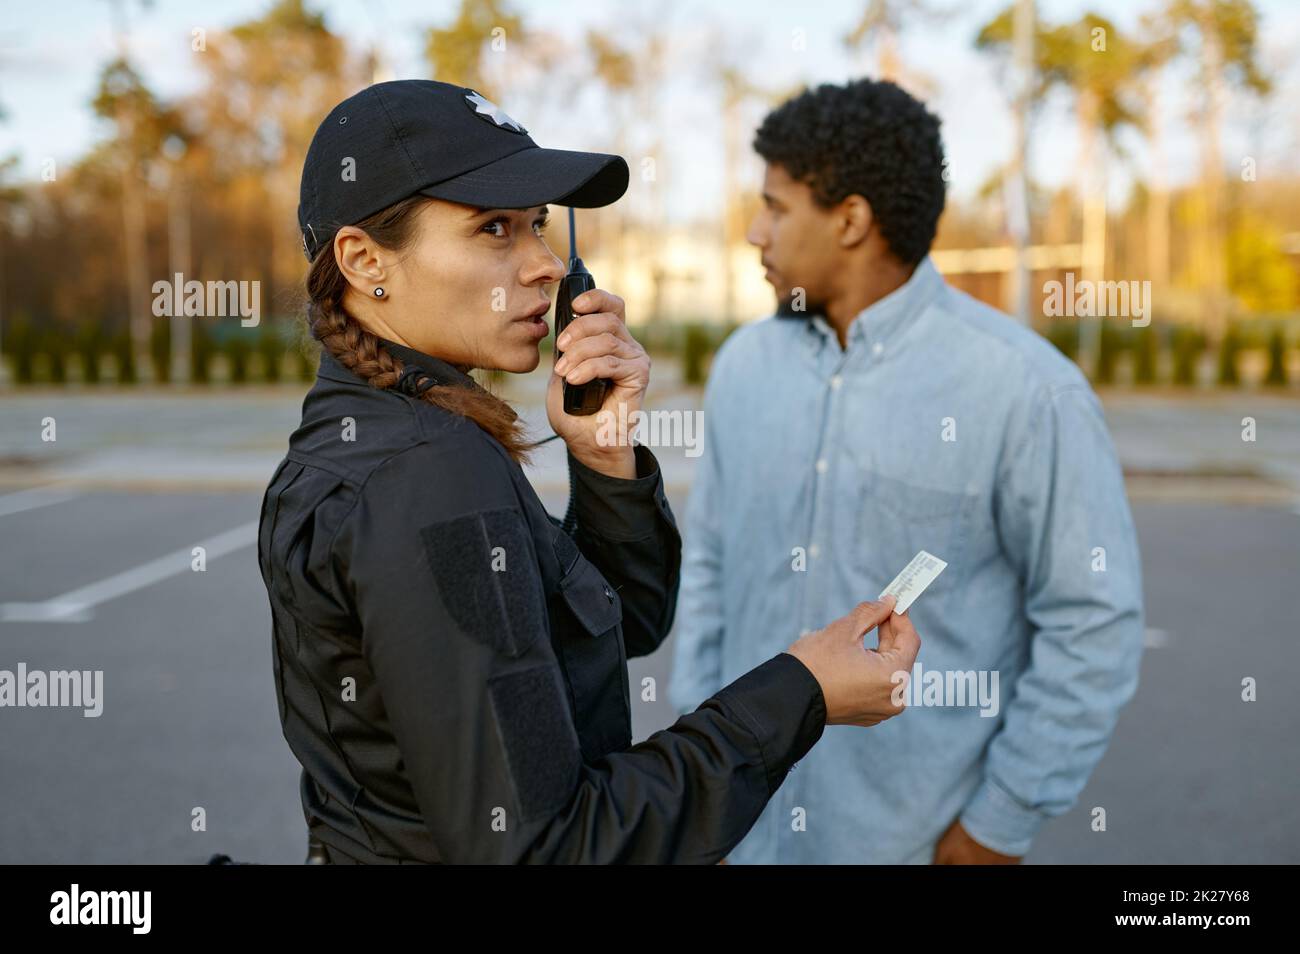 Female cop checking male passerby ID document Stock Photo